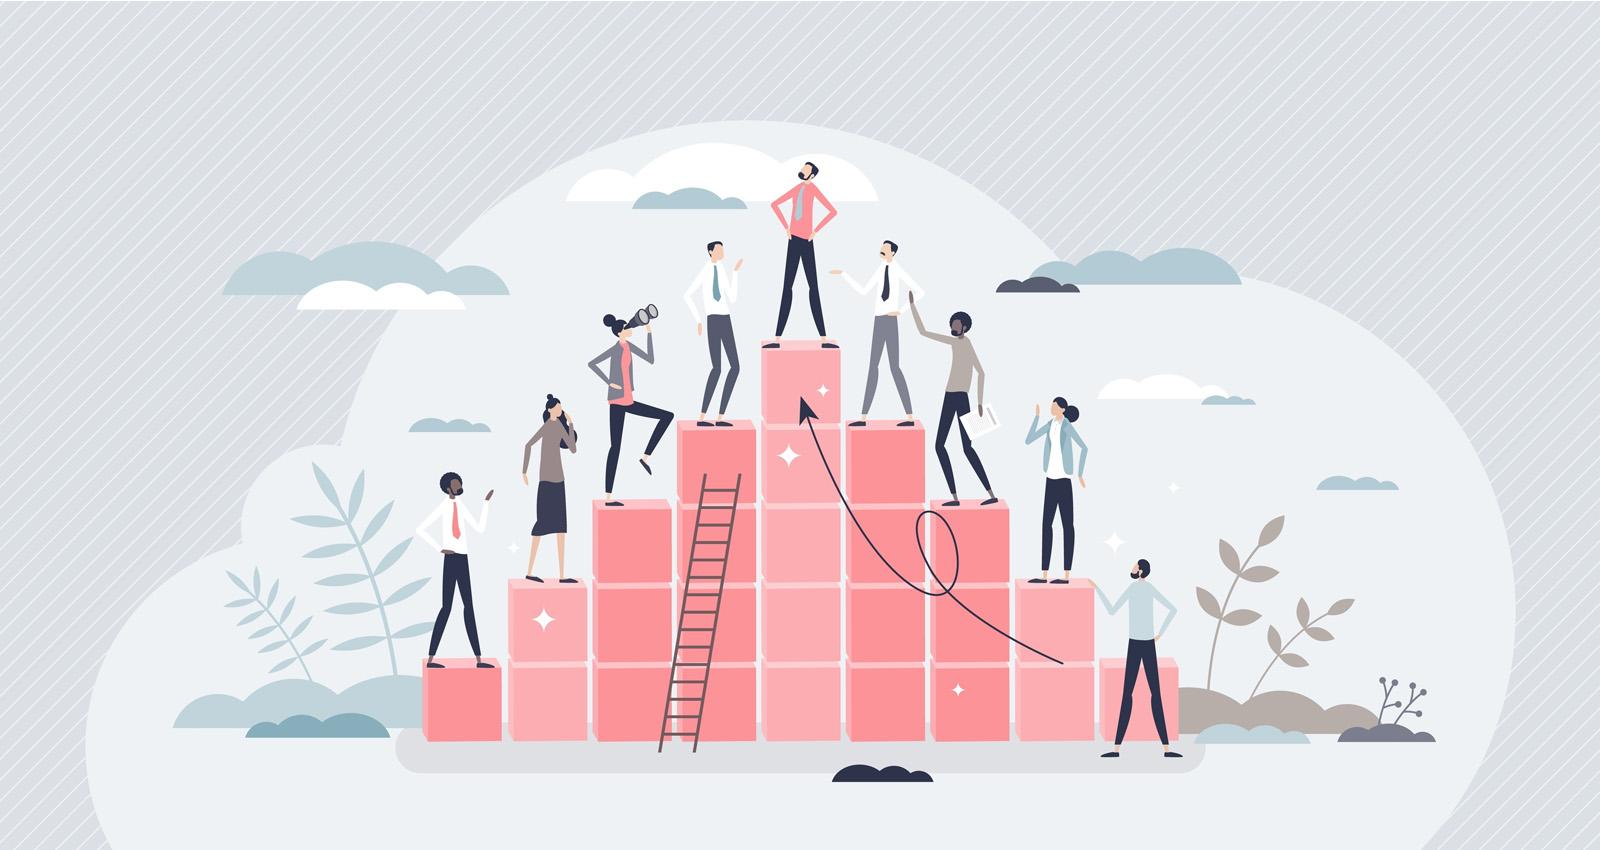 Photo: Hierarchy rank and pyramid type career development ladder tiny person concept. Company organization system from low level workers to CEO and director vector illustration. Organization team structure. Credit: VectorMine / Shutterstock